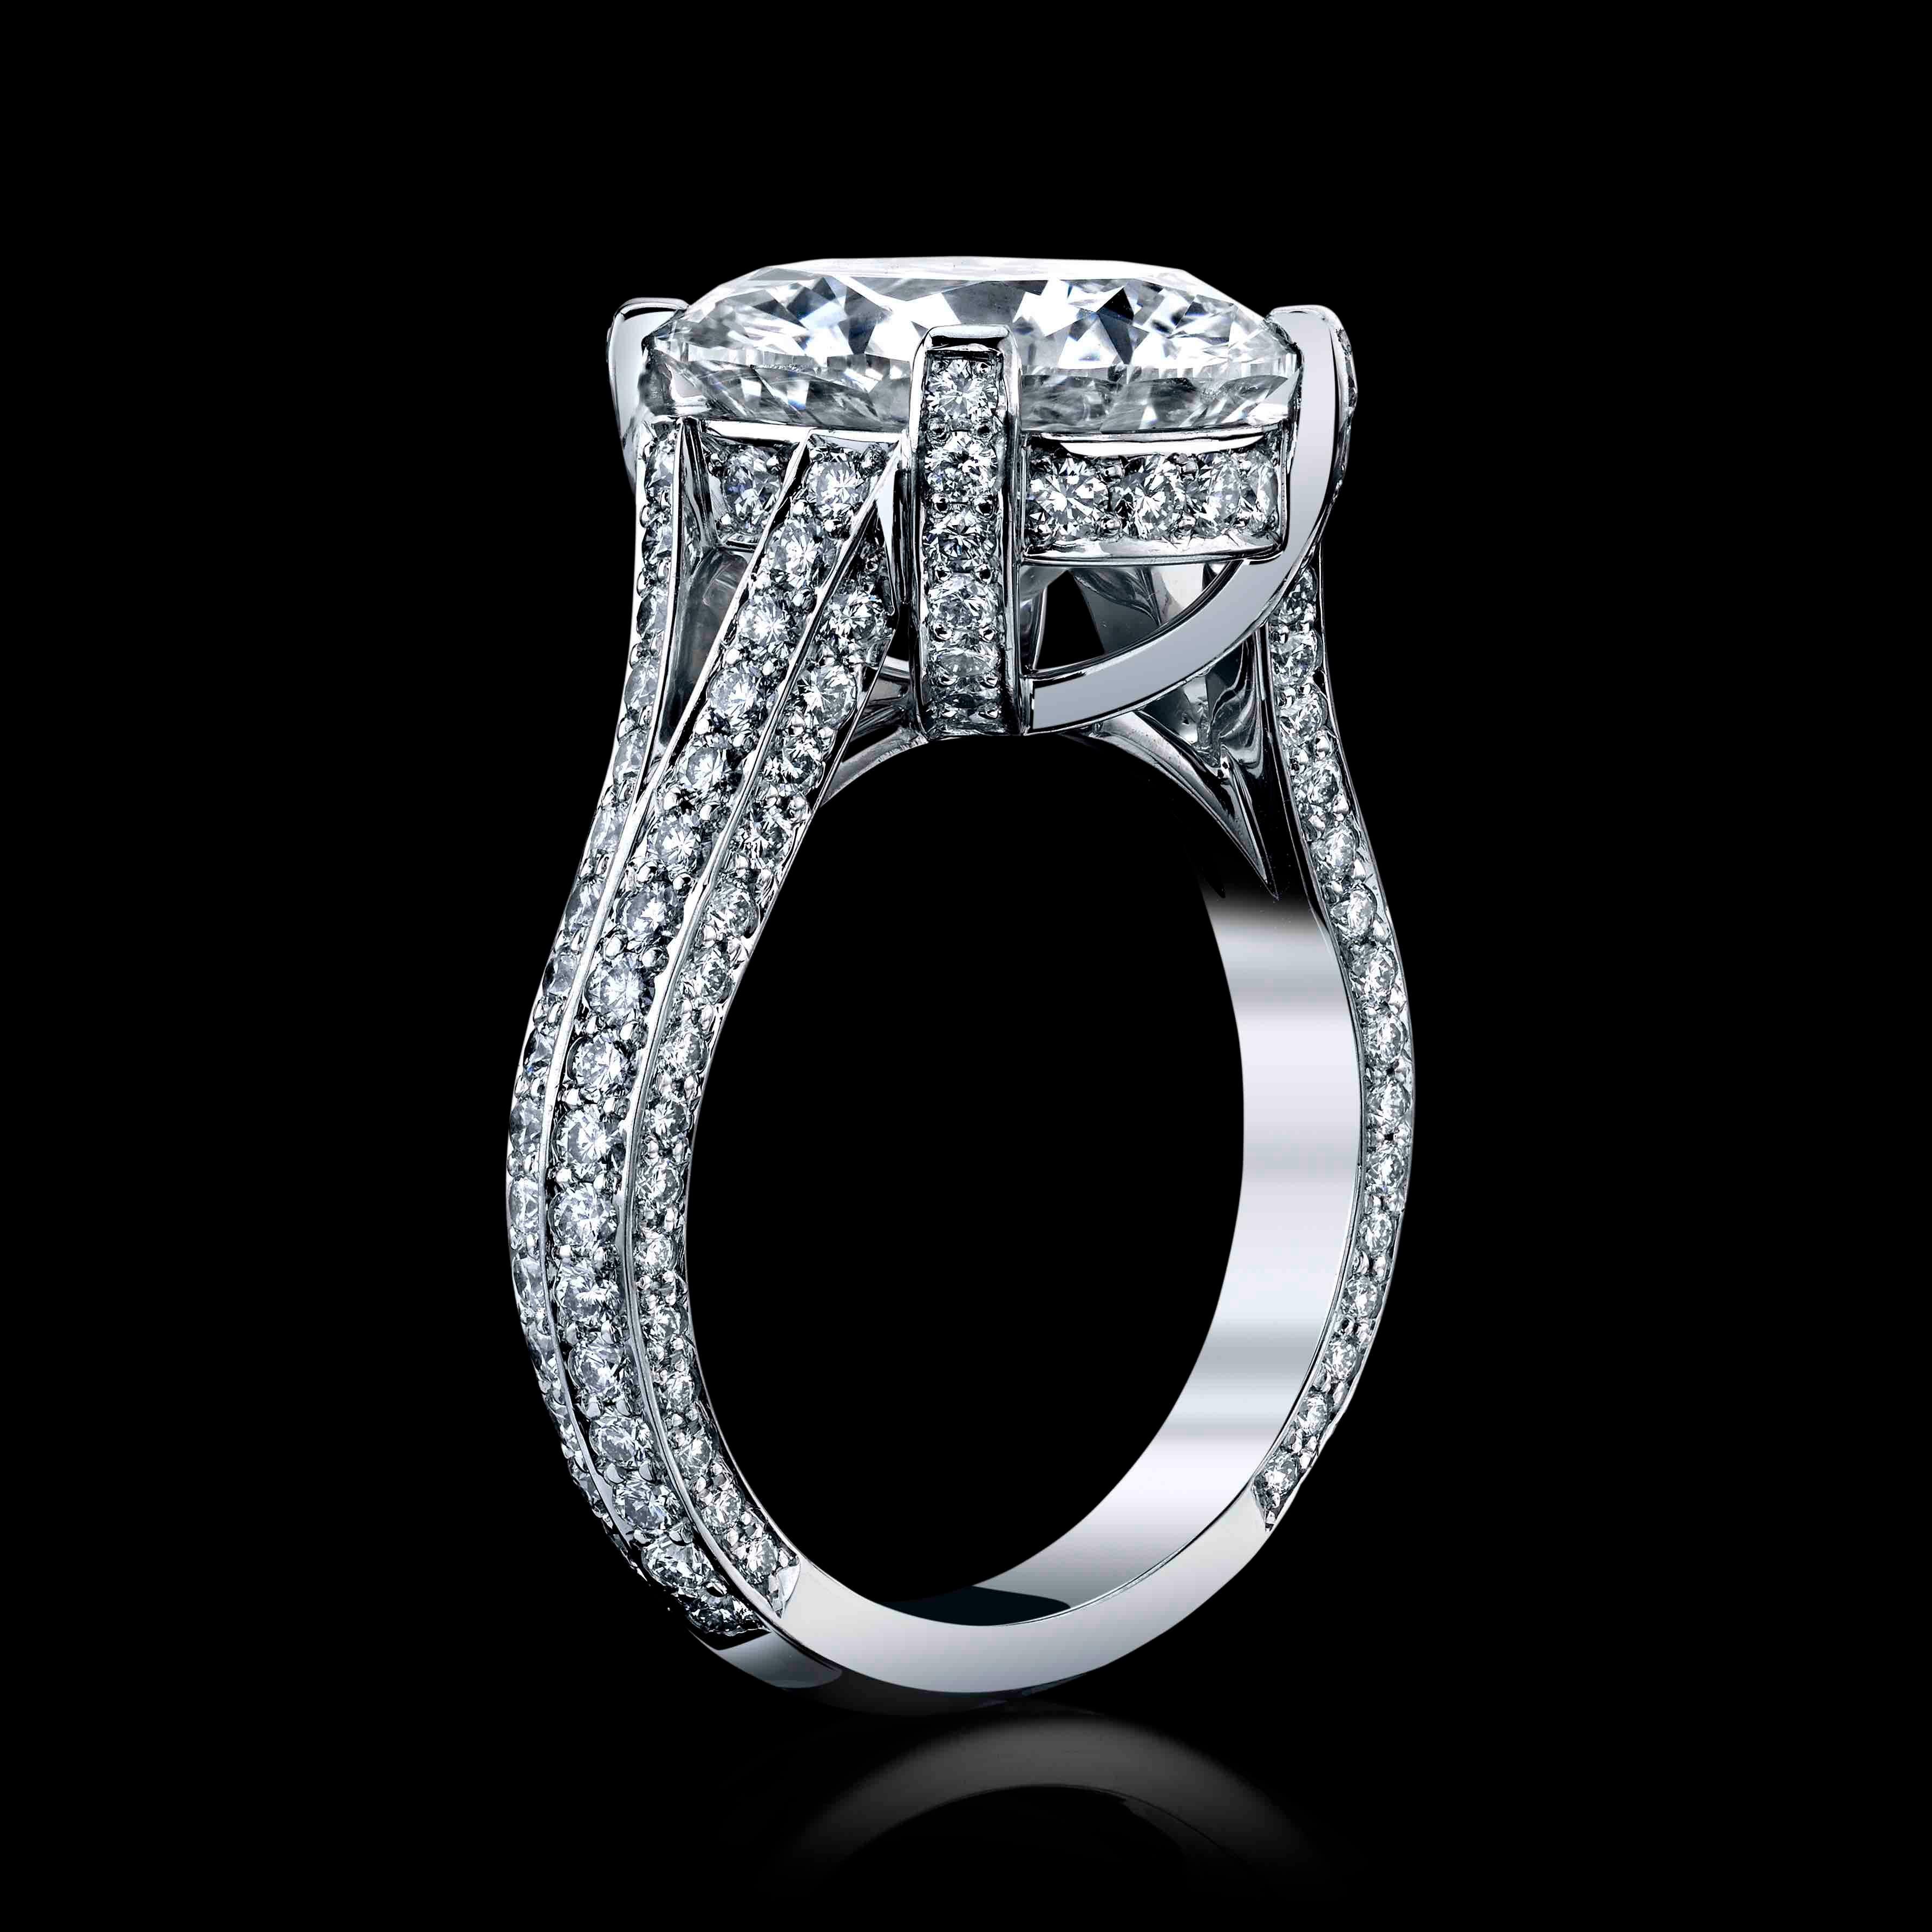 Facing up large and beautiful this 6.31ct, J color, and SI2 clarity is set in a regal 18K White gold setting with 1.00cttw melee 
GIA #6177978457
